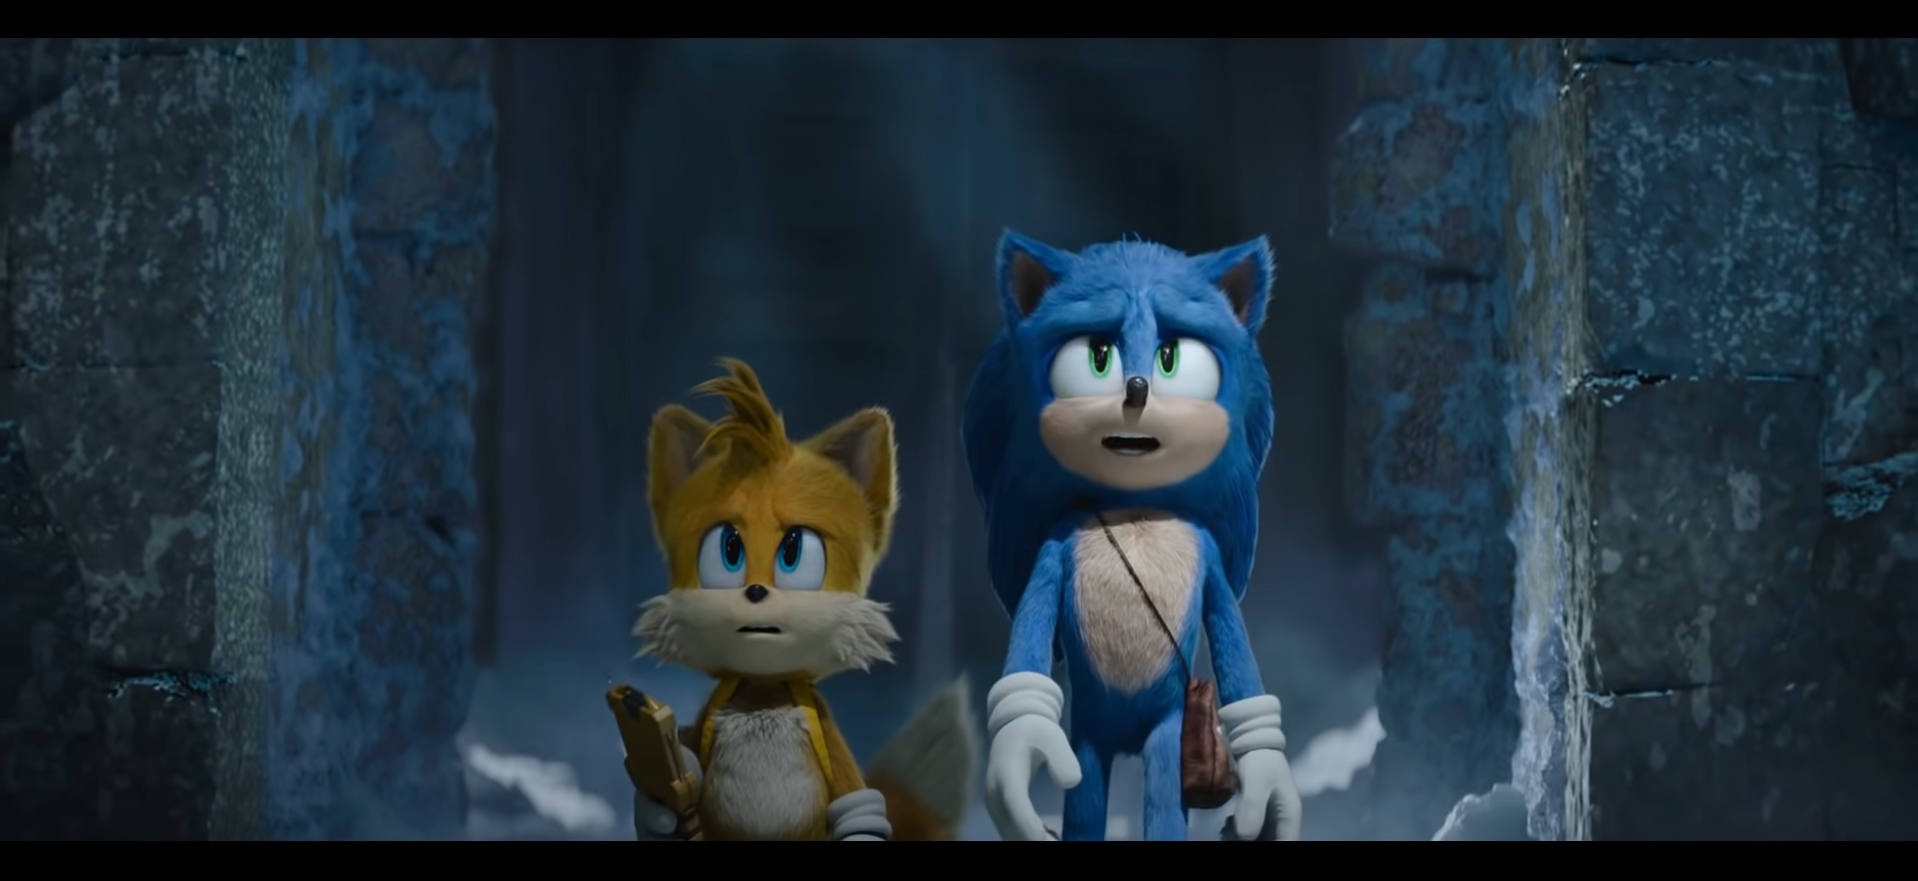 If Super Sonic shows up in this movie, I WILL cry - me @ my friends before  the Sonic Movie 2